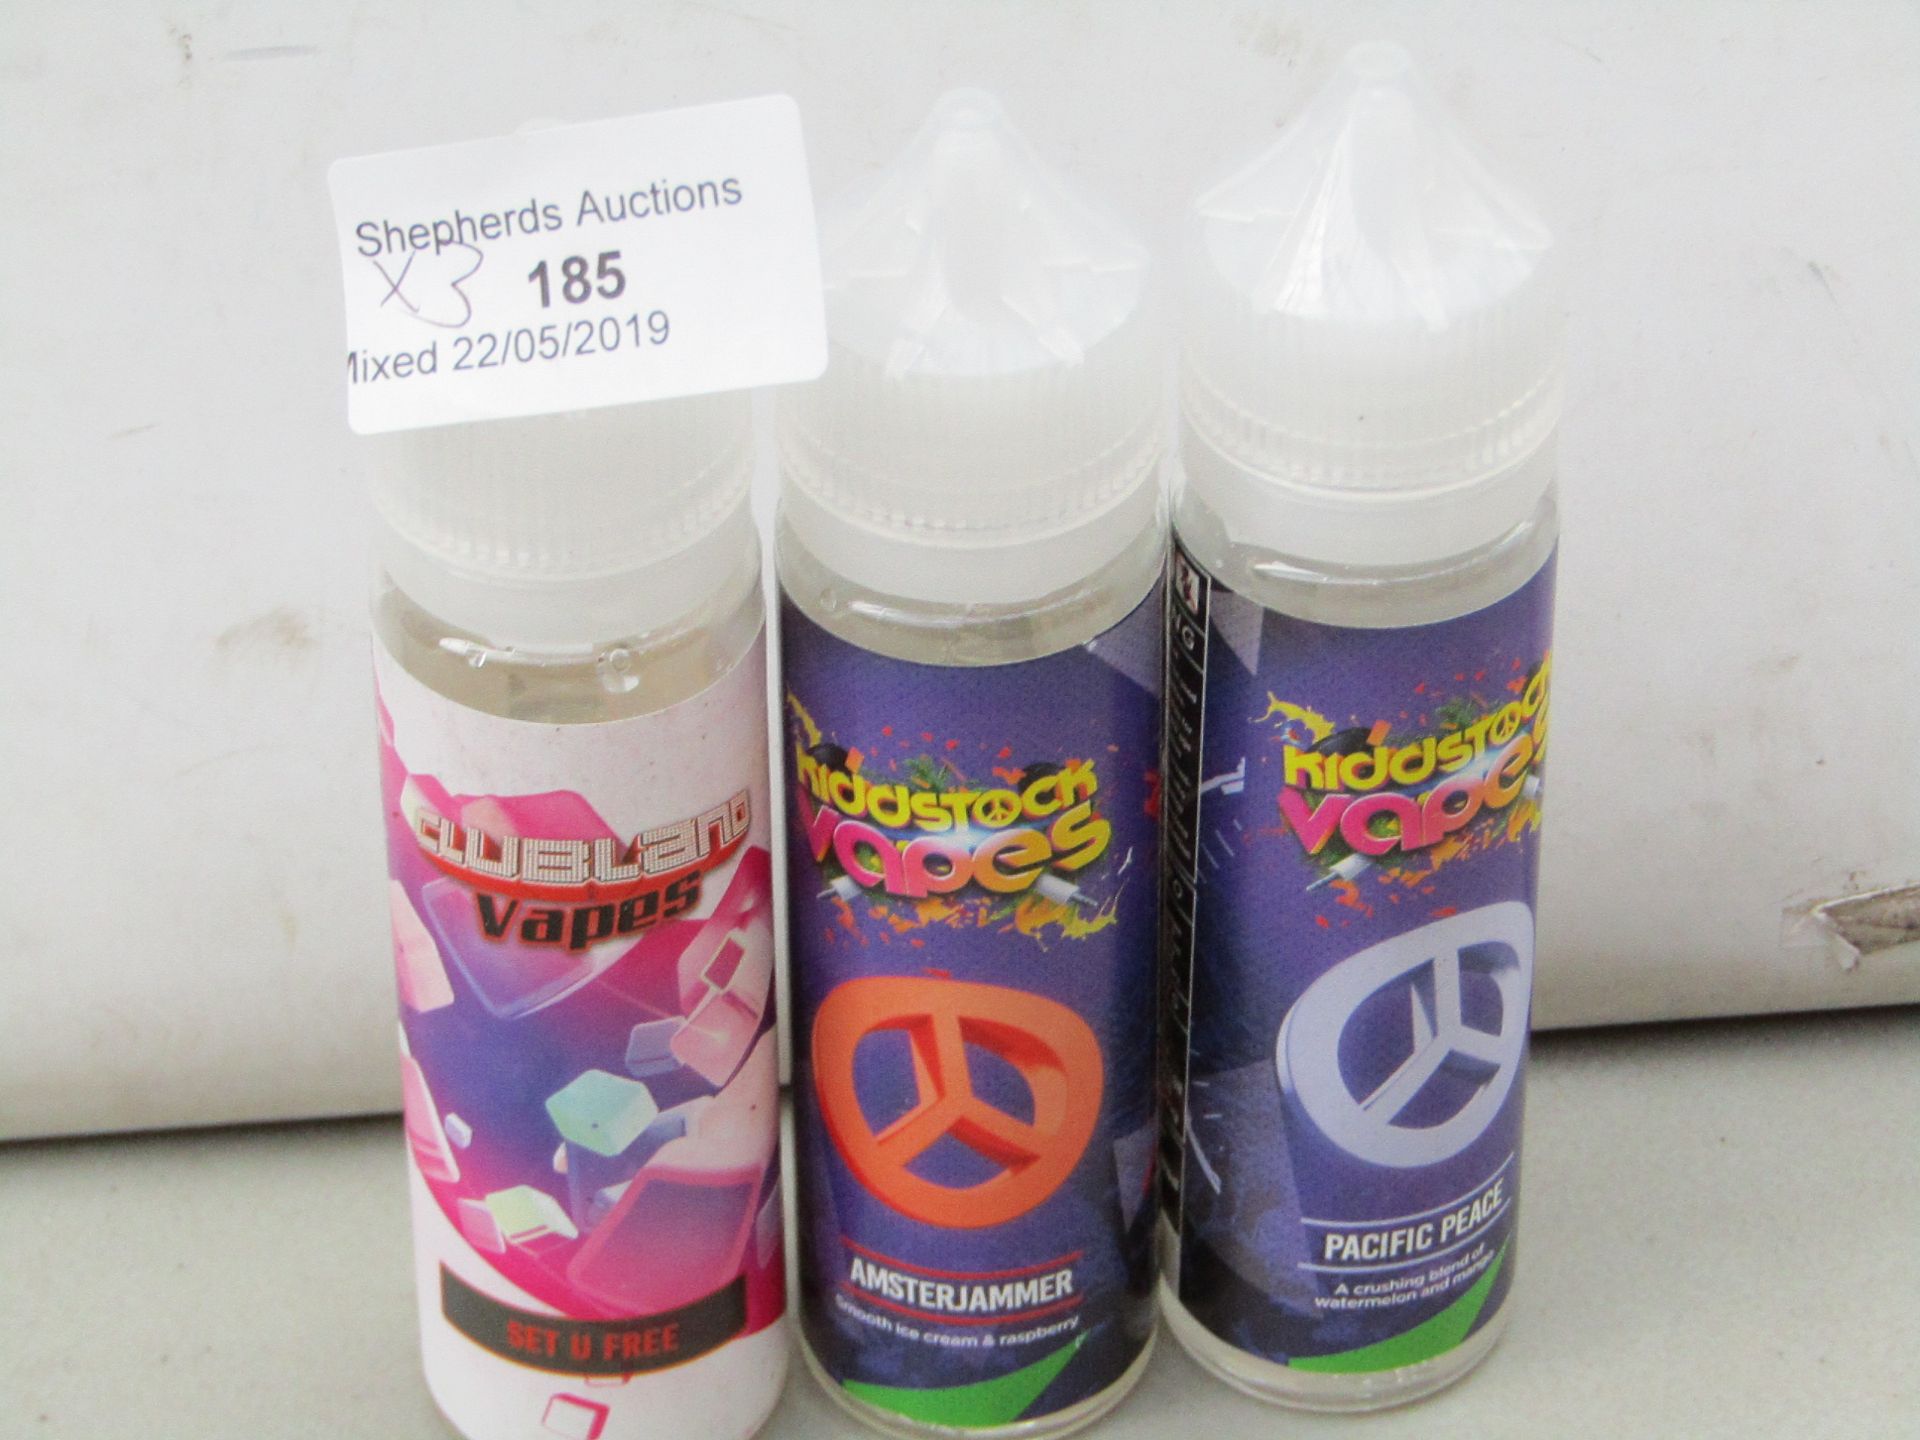 3 various Vaping 50ml Liquids expiry 4/4/20 (see image for flavours)